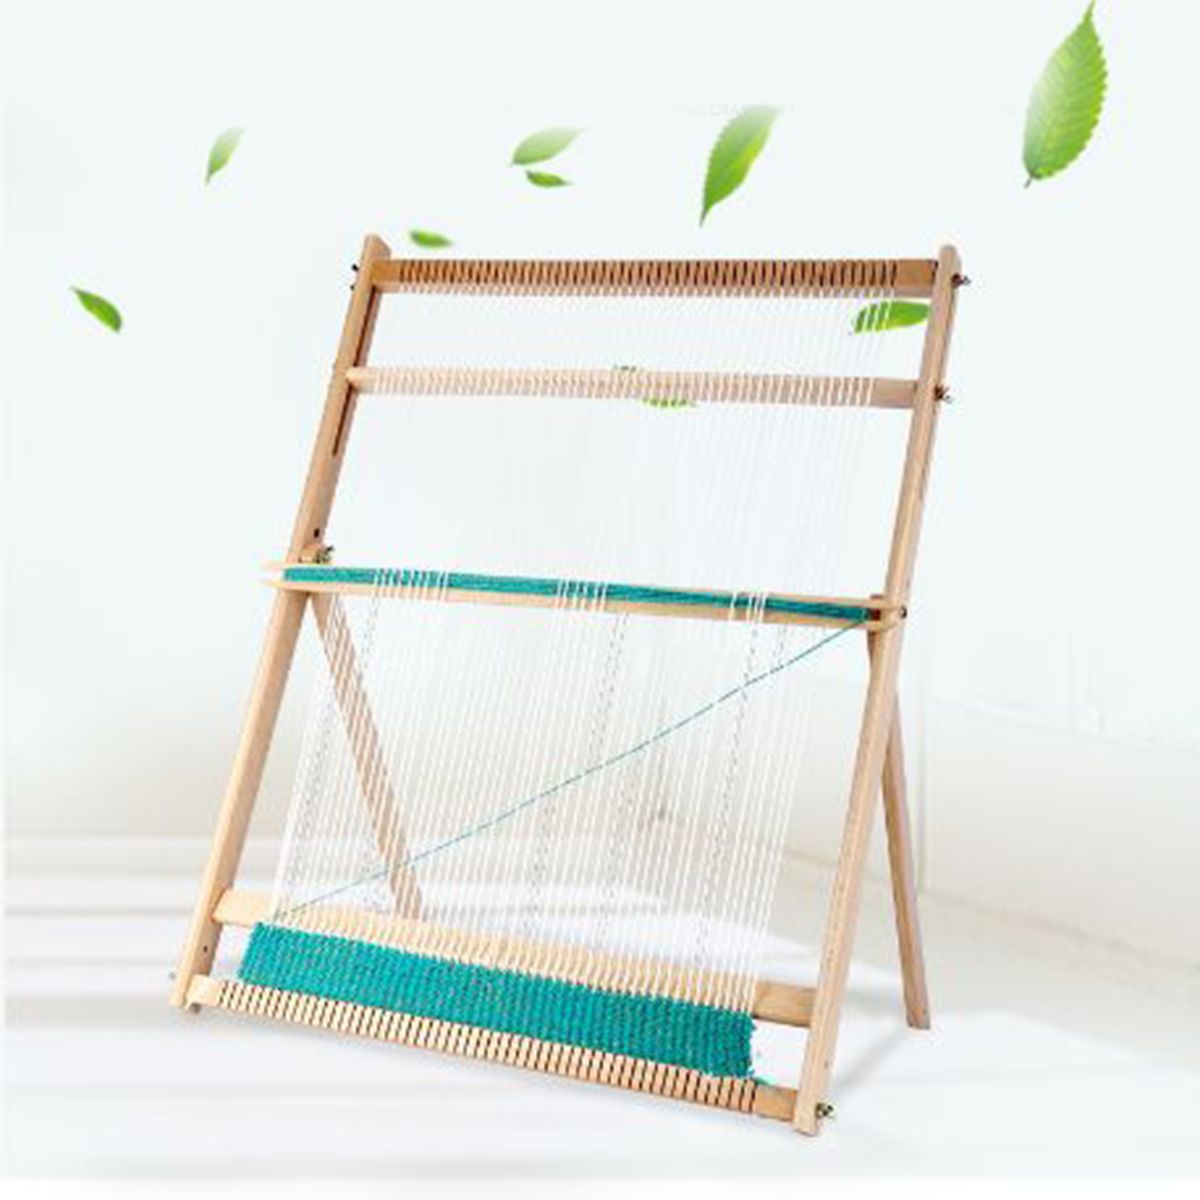 Standing-DIY-Woven-Set-Weaving-Loom-Kit-Looms-Wooden-Tapestry-Hand-Knitted-Machine-1753097